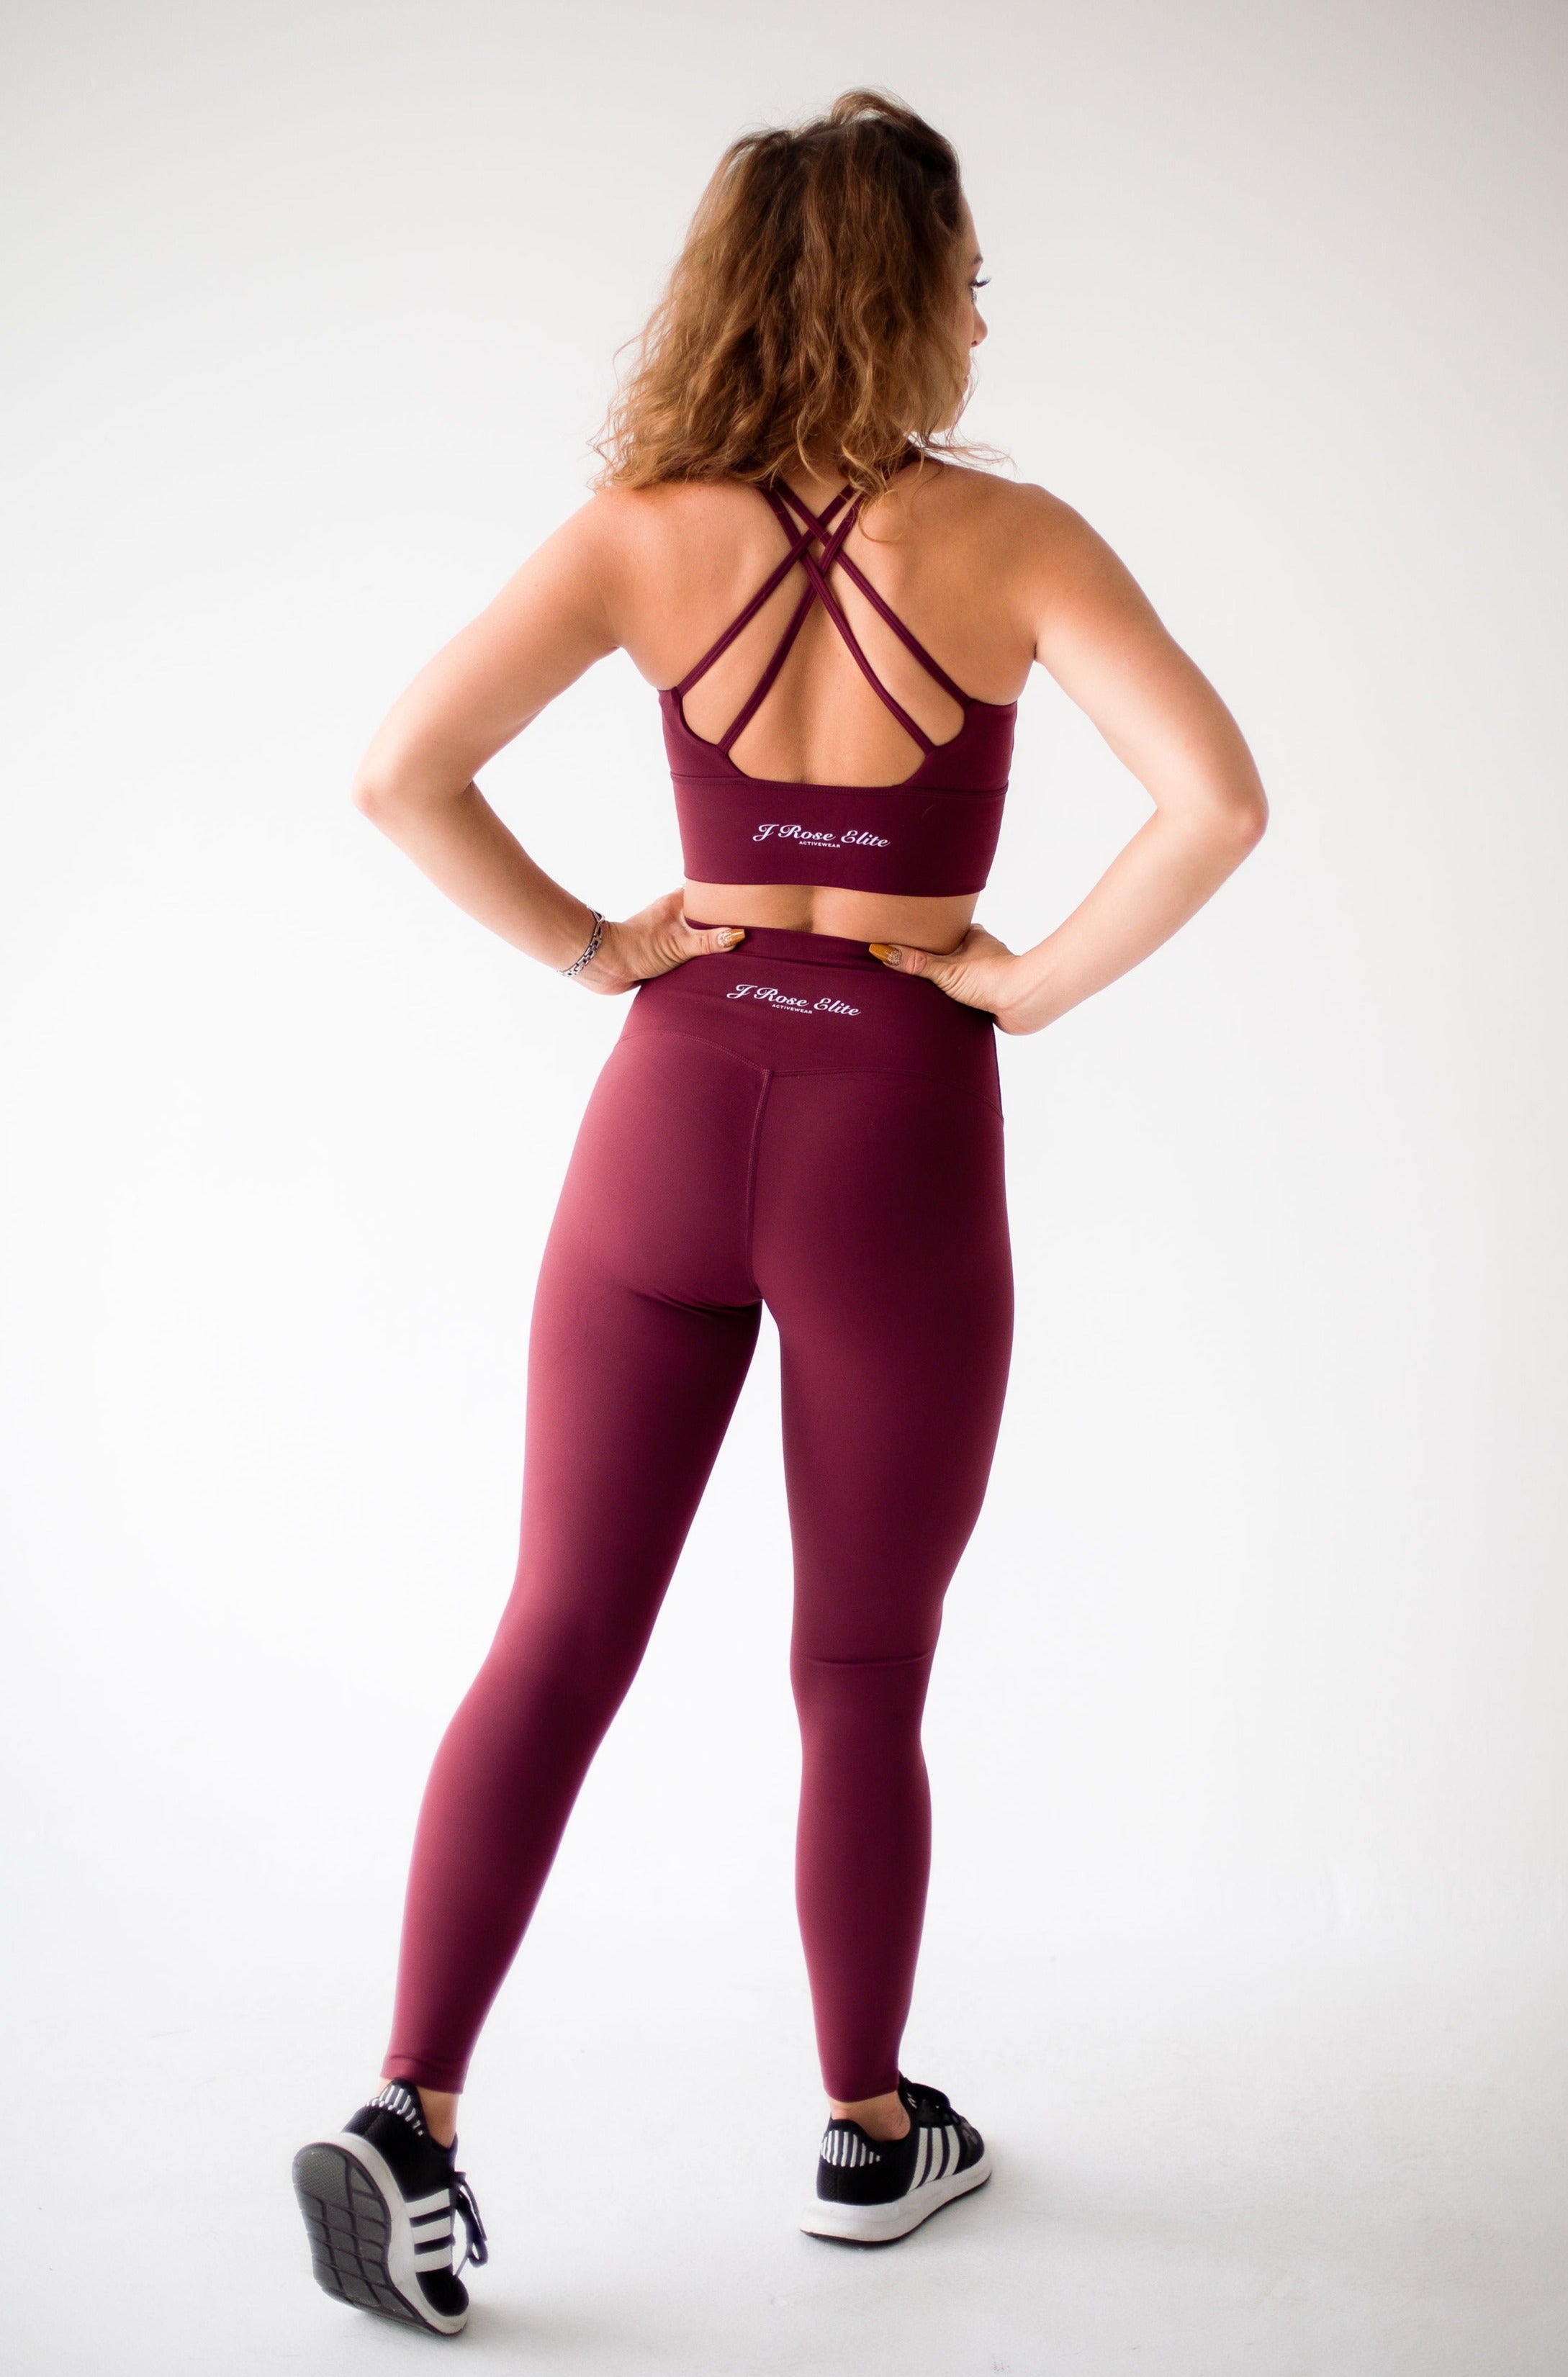 Fabletics Seamless High Waisted Jacquard 7/8 red high rise activewear  leggings M | eBay